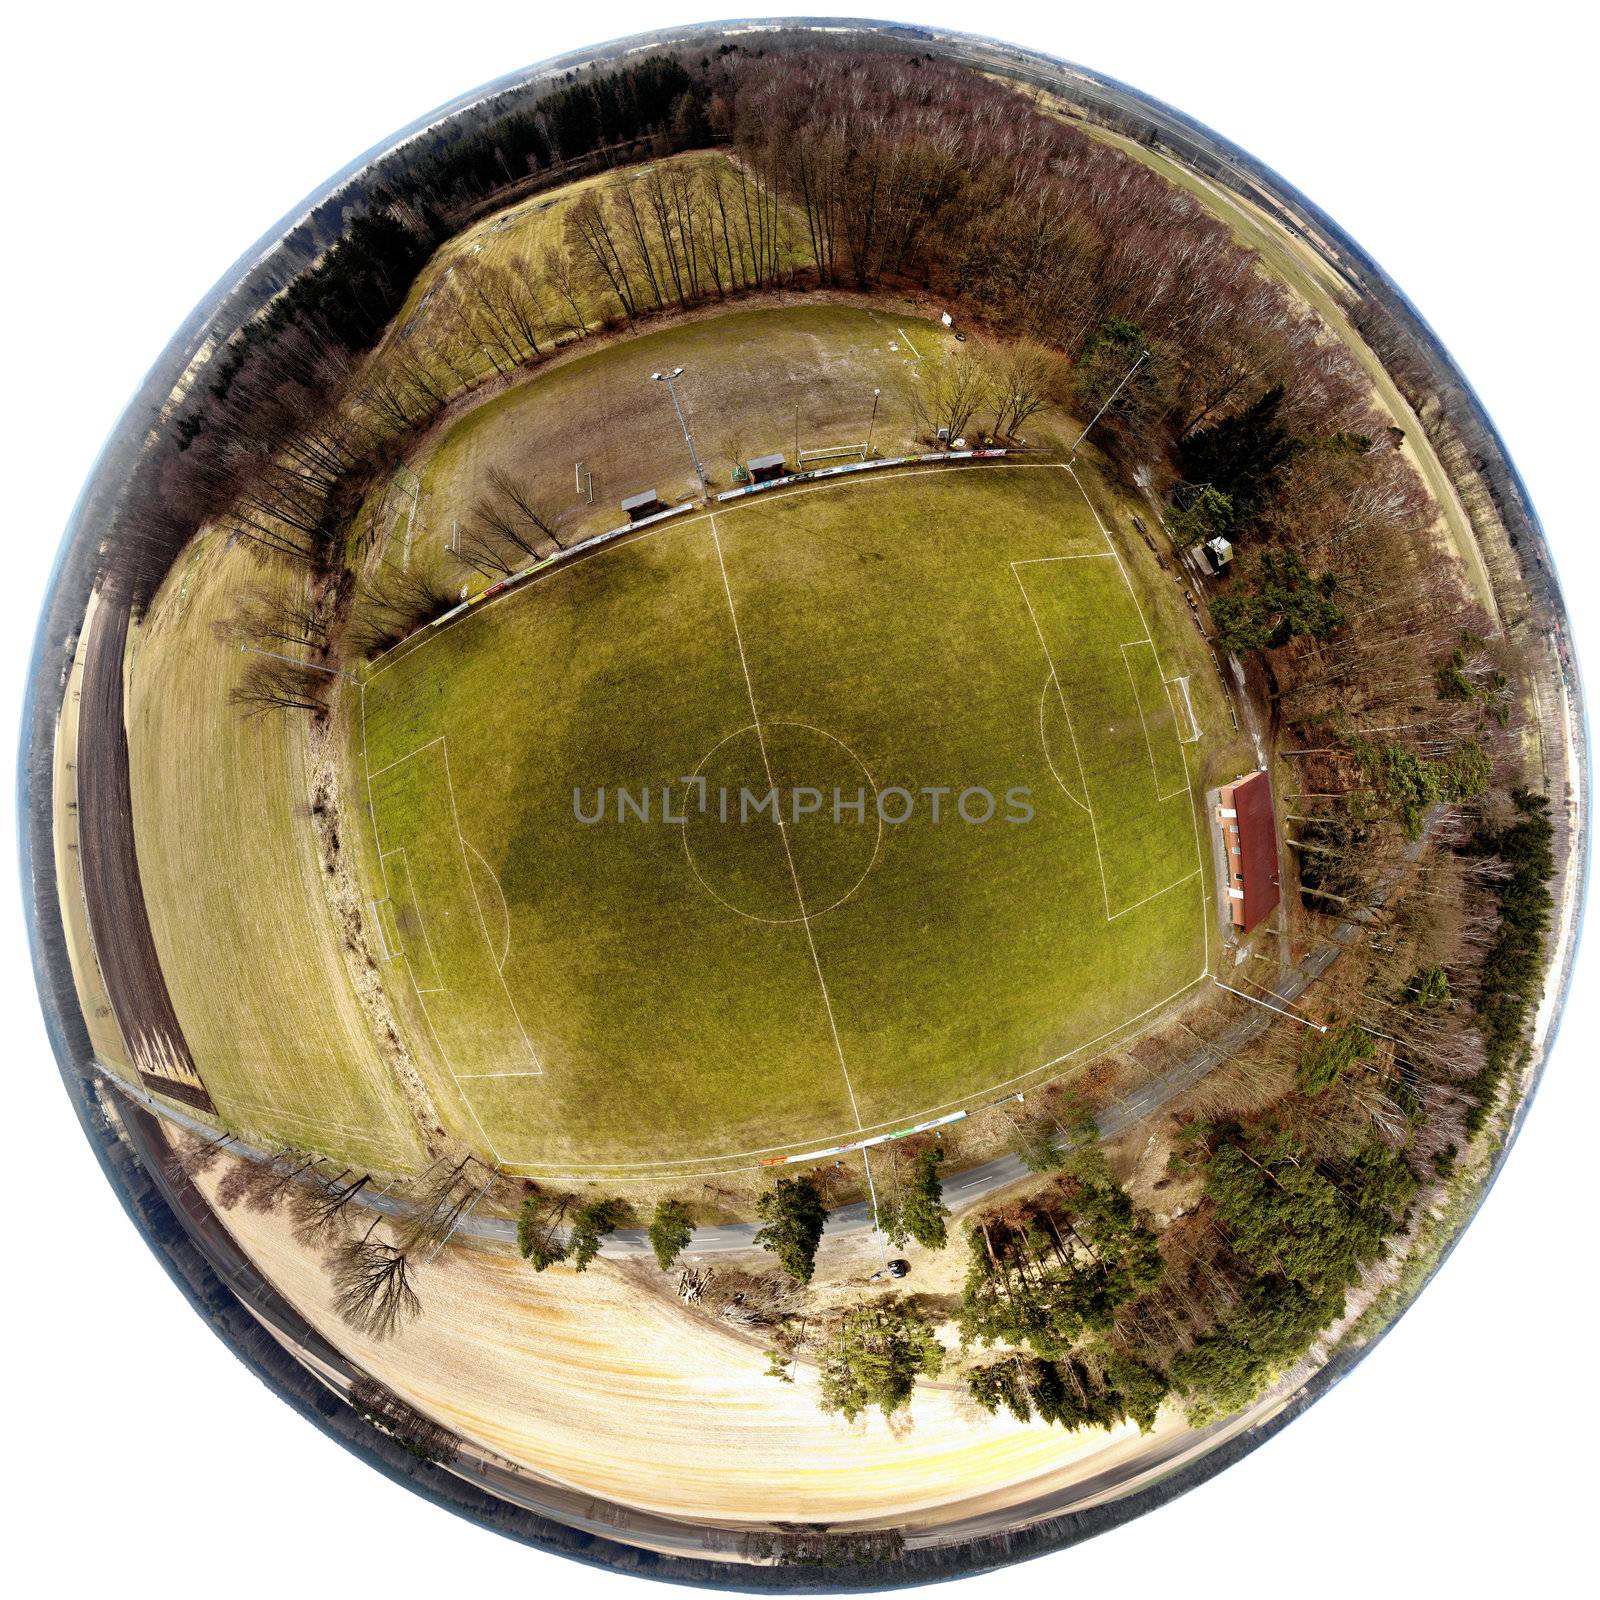 Spherical panorama from composite aerial photos of a football field in a village in the heath, made with drone